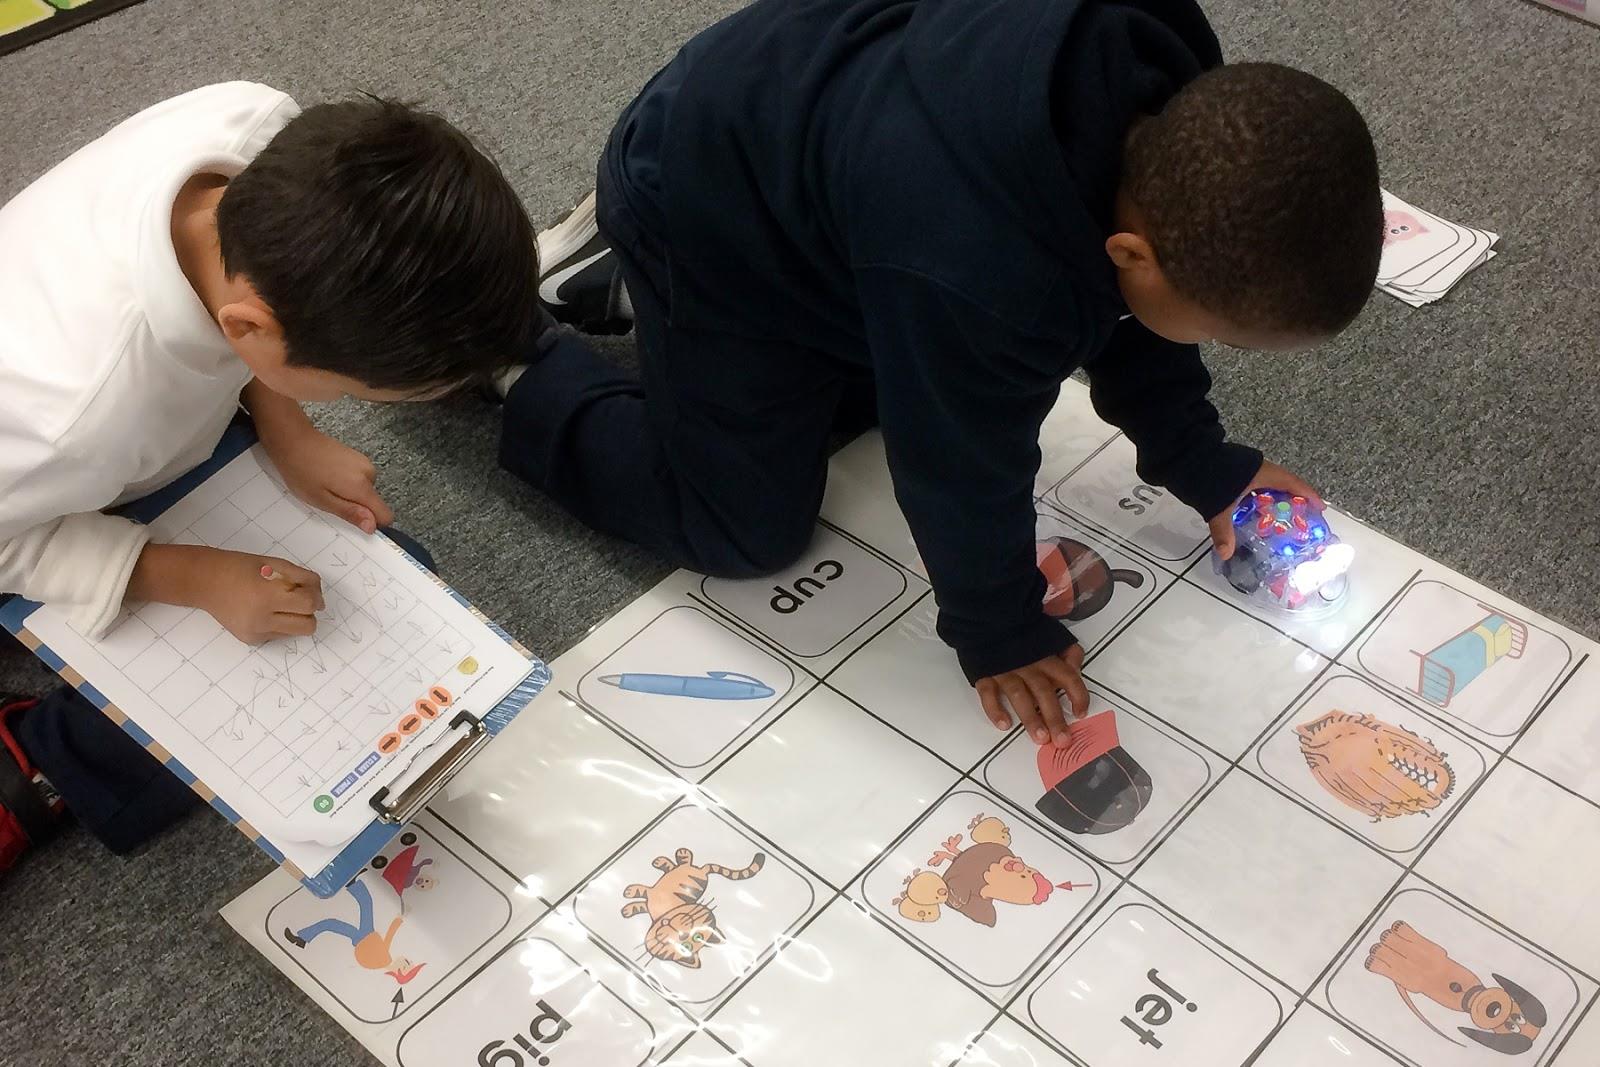 Young students doing computational thinking exercises on the floor